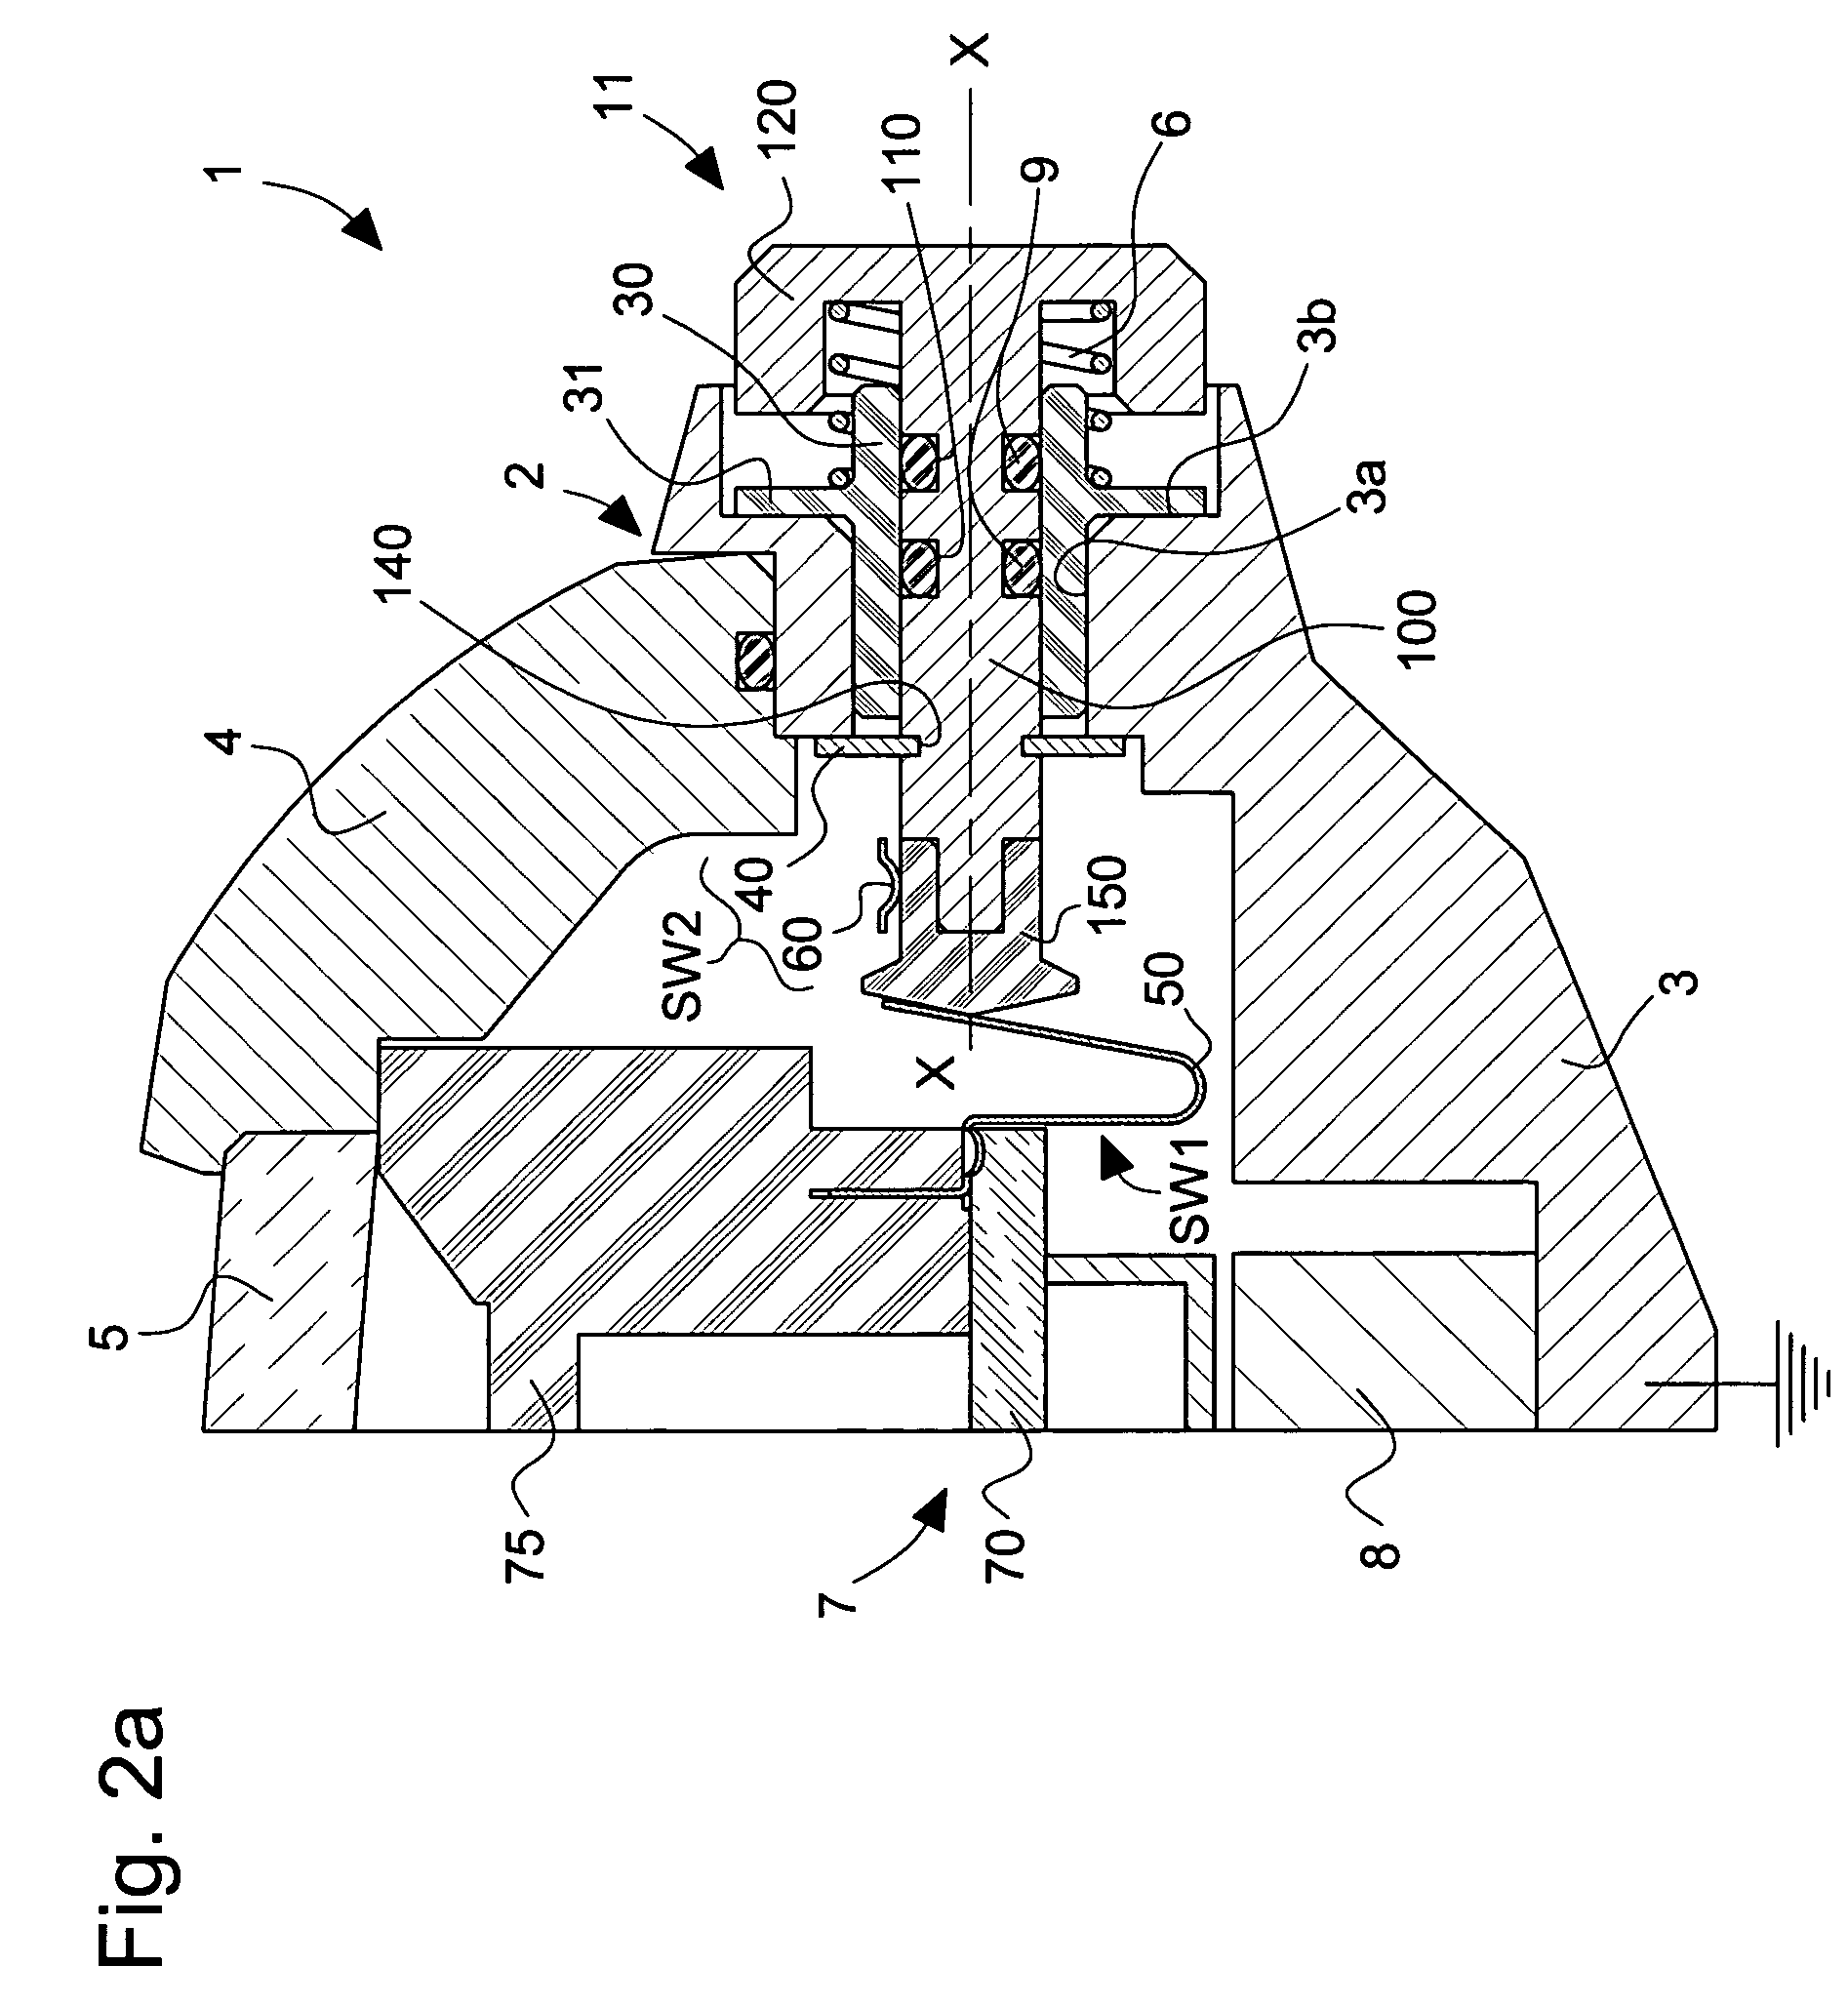 Portable electronic instrument including at least one control member arranged for also transmitting electric signals